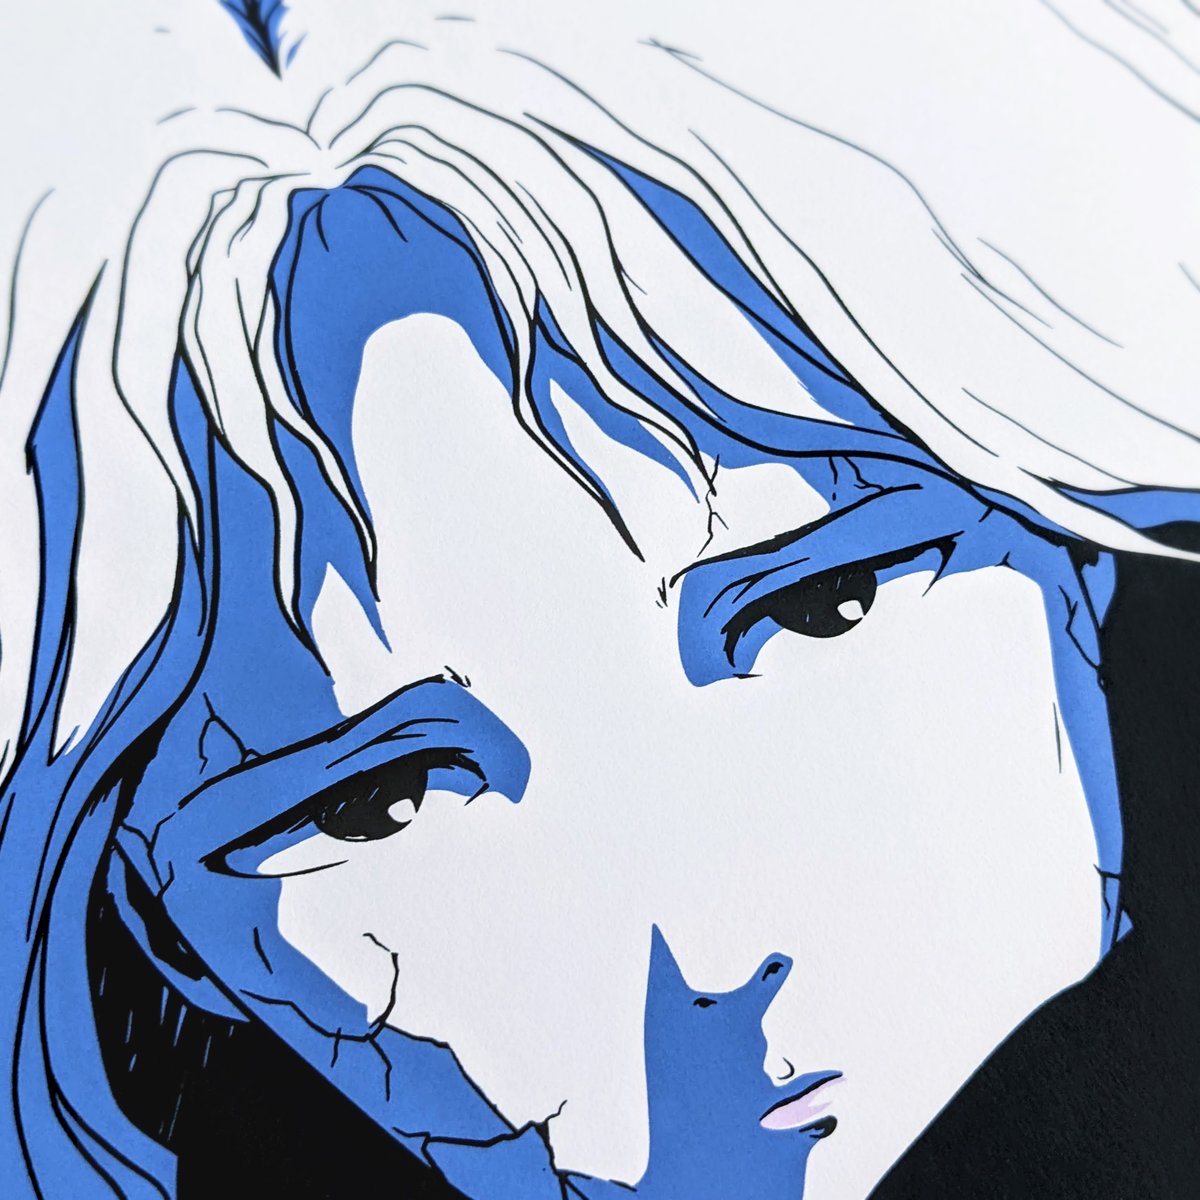 Perfect Blue' Poster by Ethan Sharp